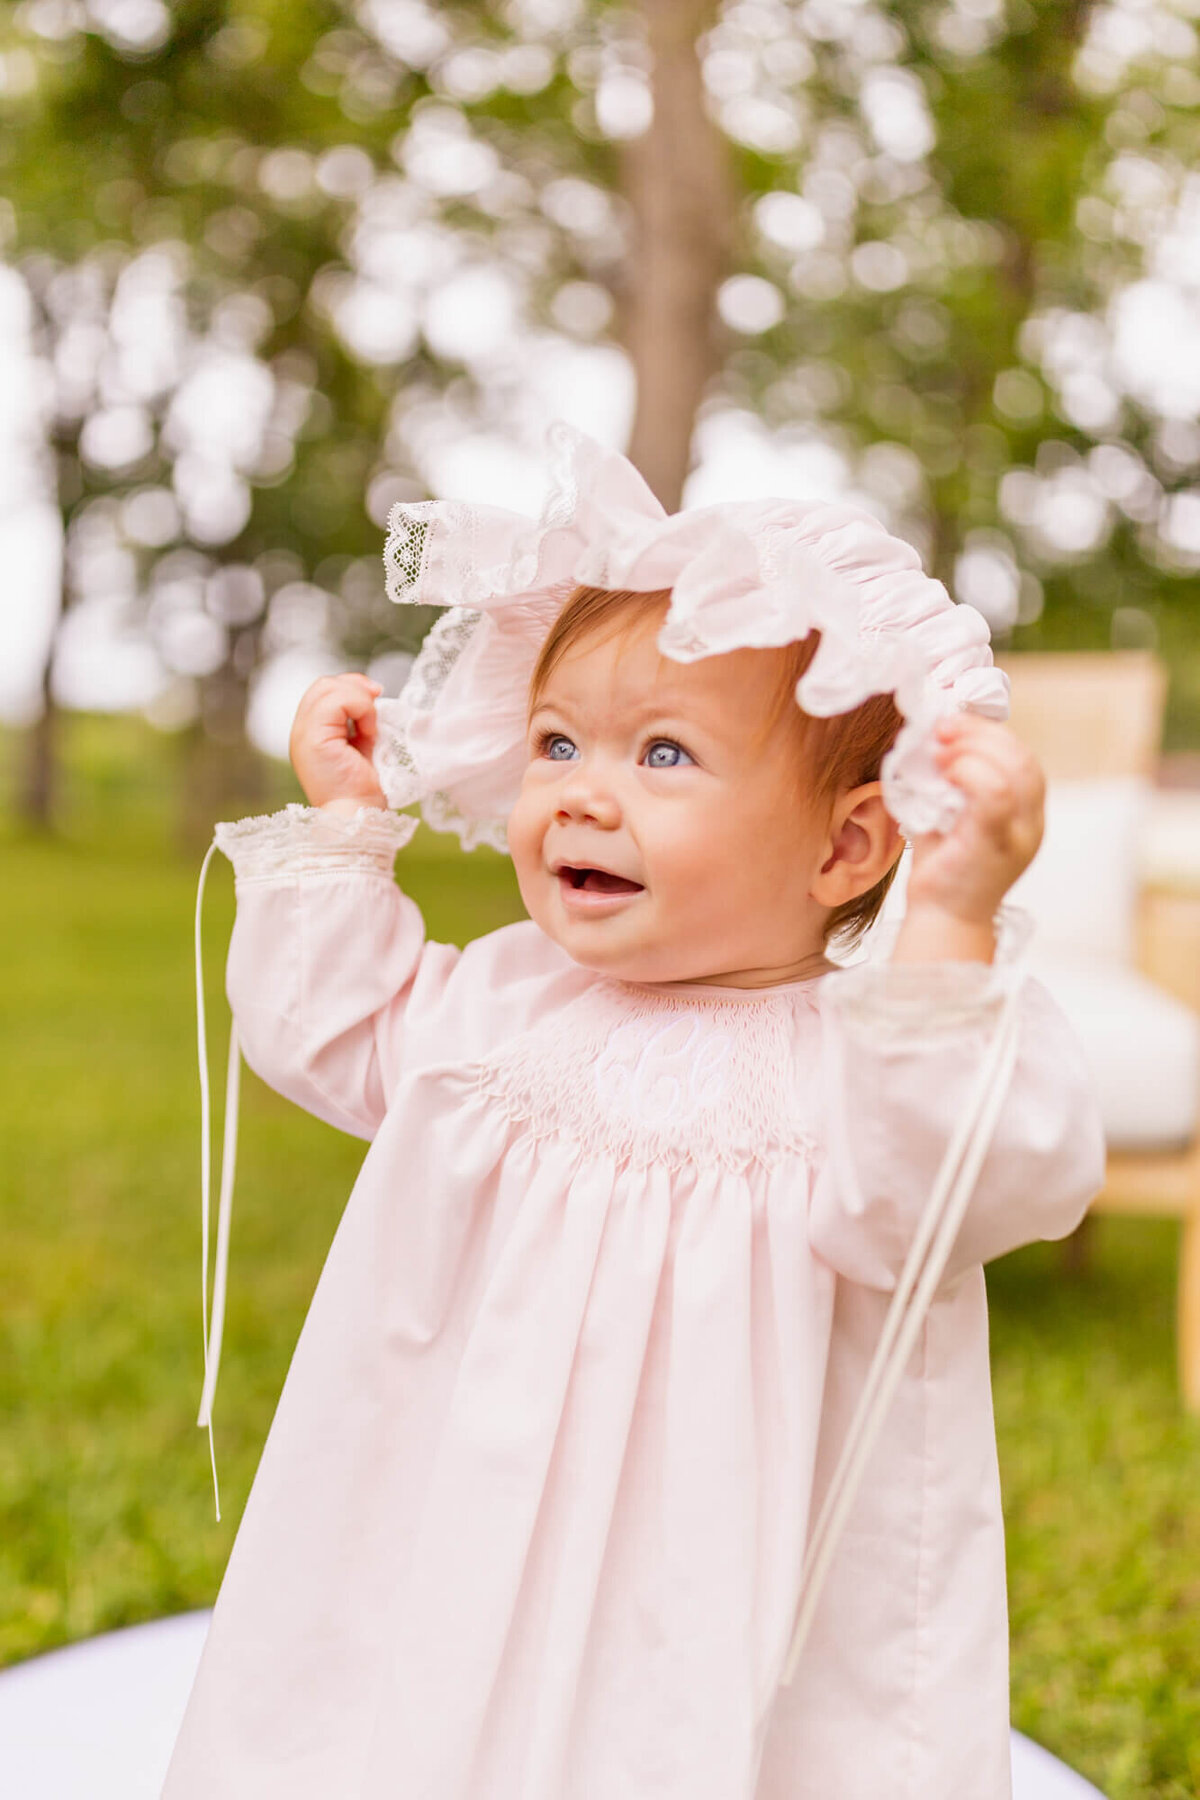 Little girl with a monogrammed pink dress and matching bonnet with lace